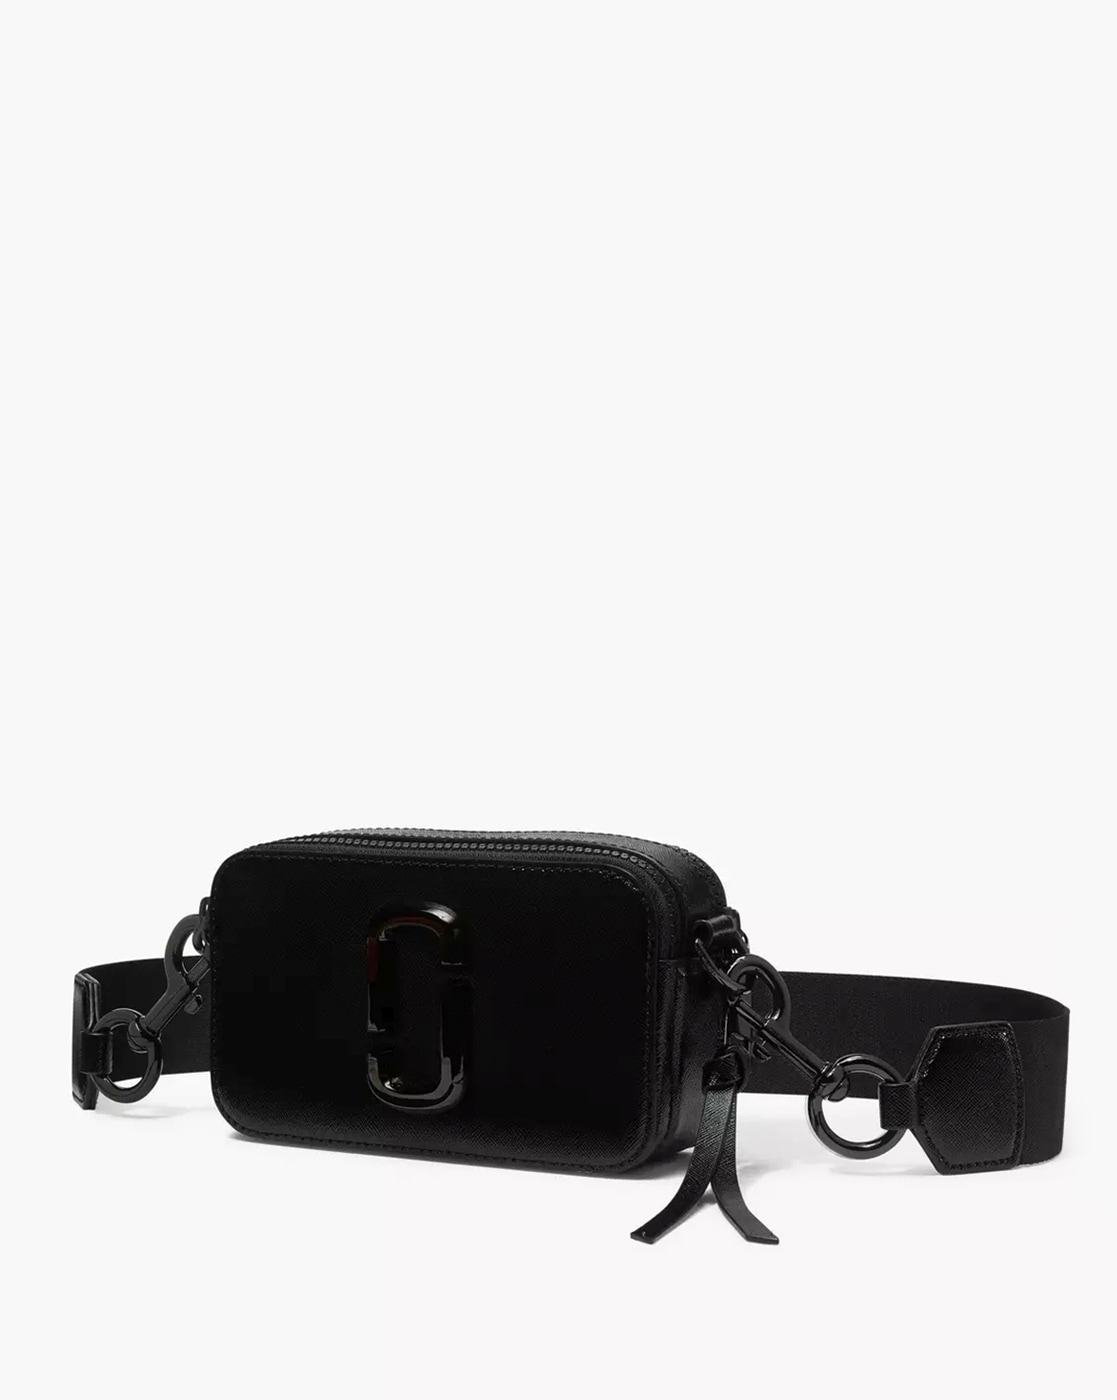 The Marc Jacobs The Snapshot DTM Black